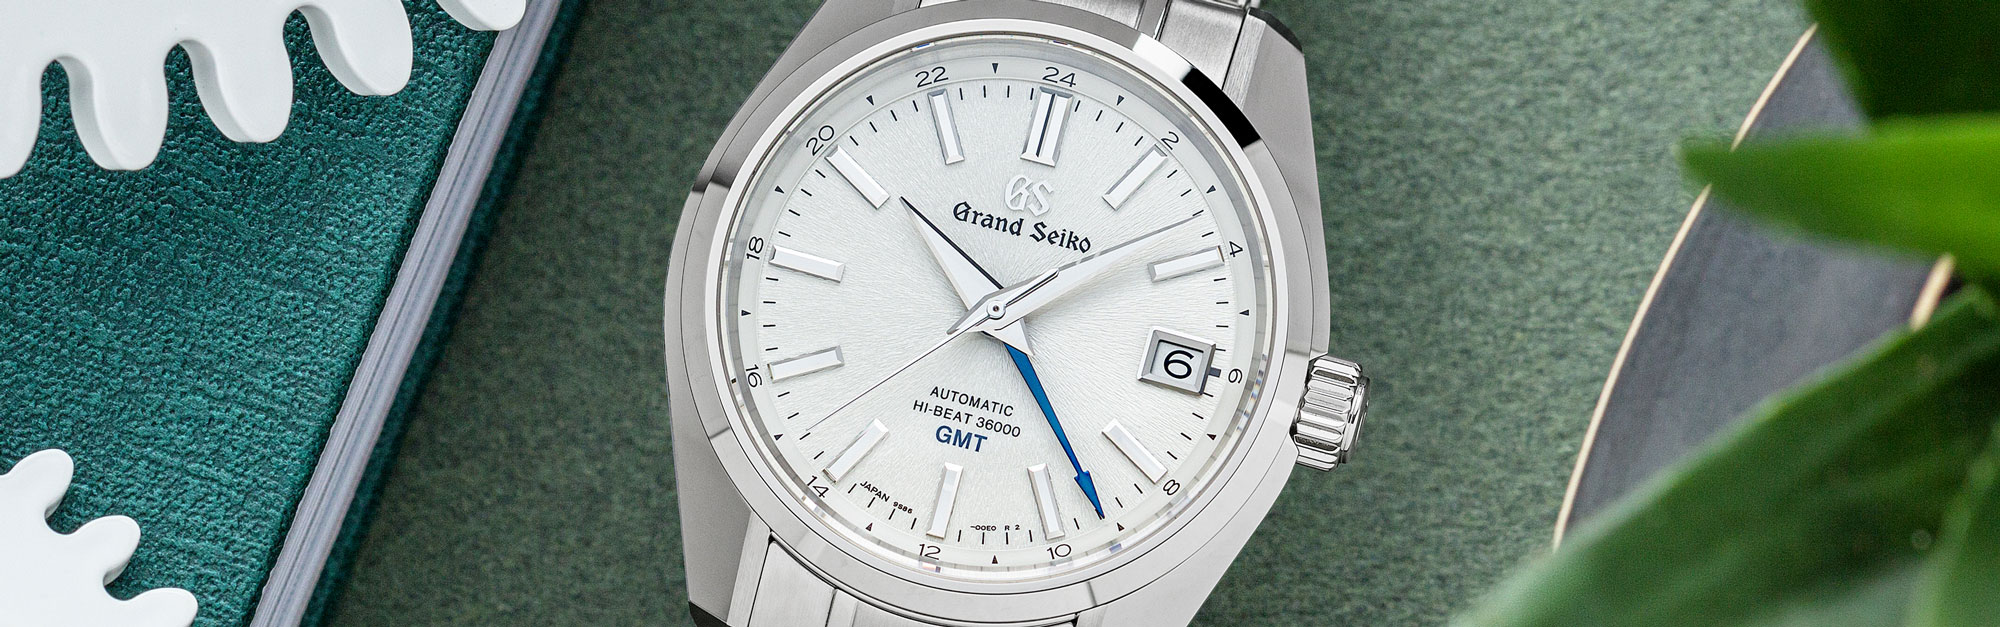 Grand Seiko SBGJ201 white dial stainless steel sport watch with GMT.